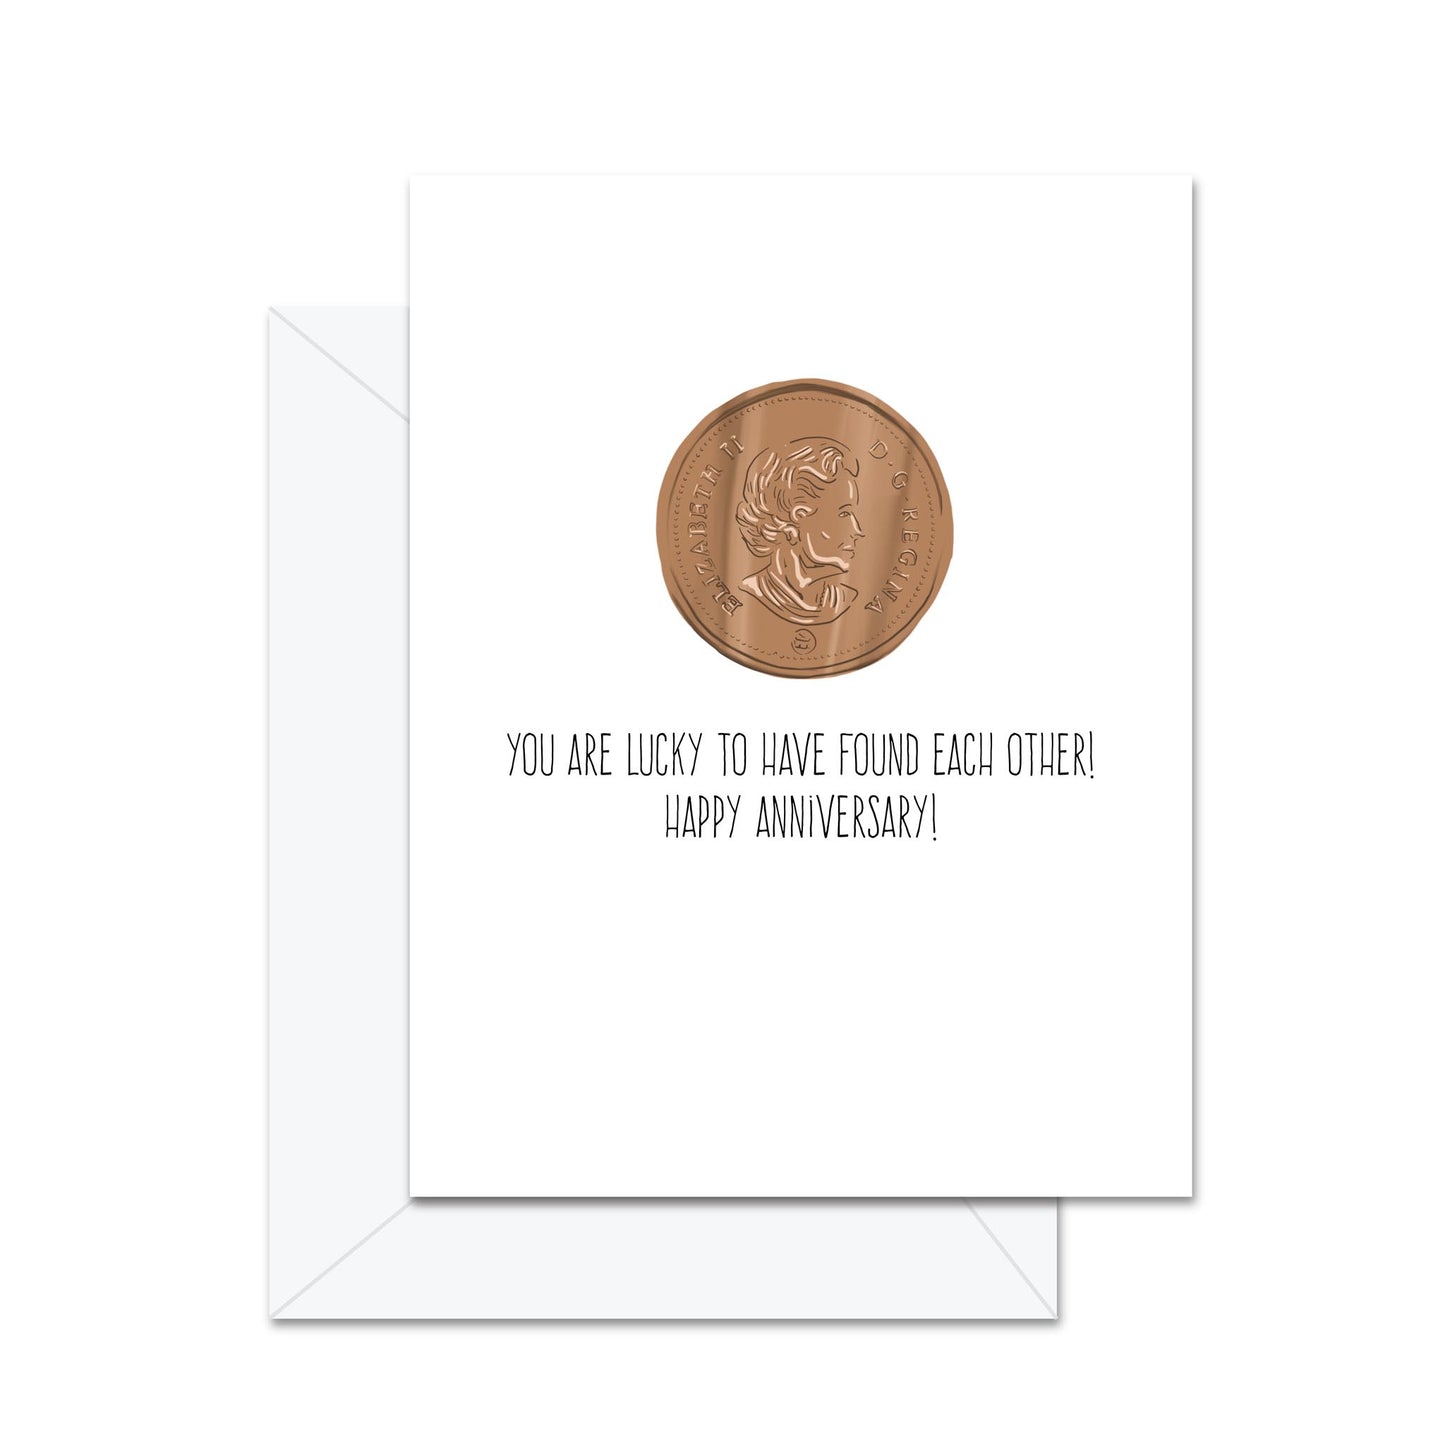 You Are Lucky To Have Found Each Other. Happy Anniversary! - Greeting Card